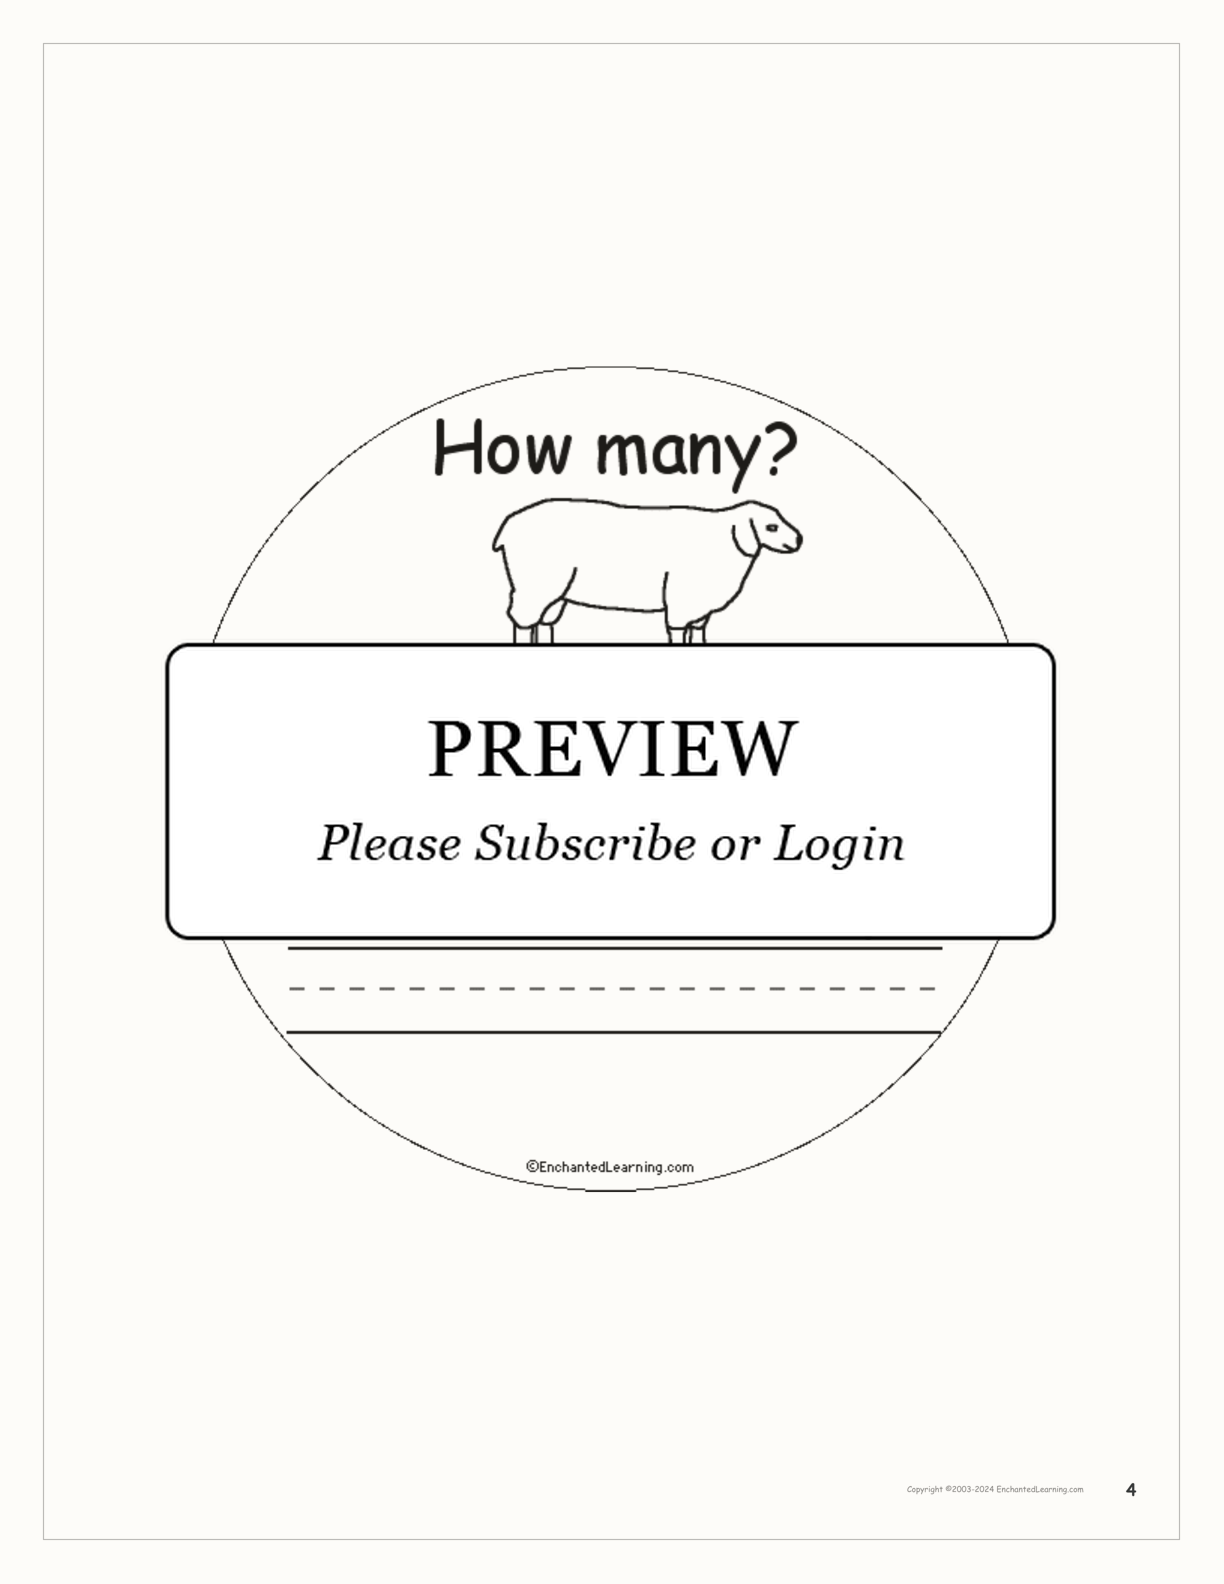 How Many Farm Animals? Book for Early Readers interactive printout page 4